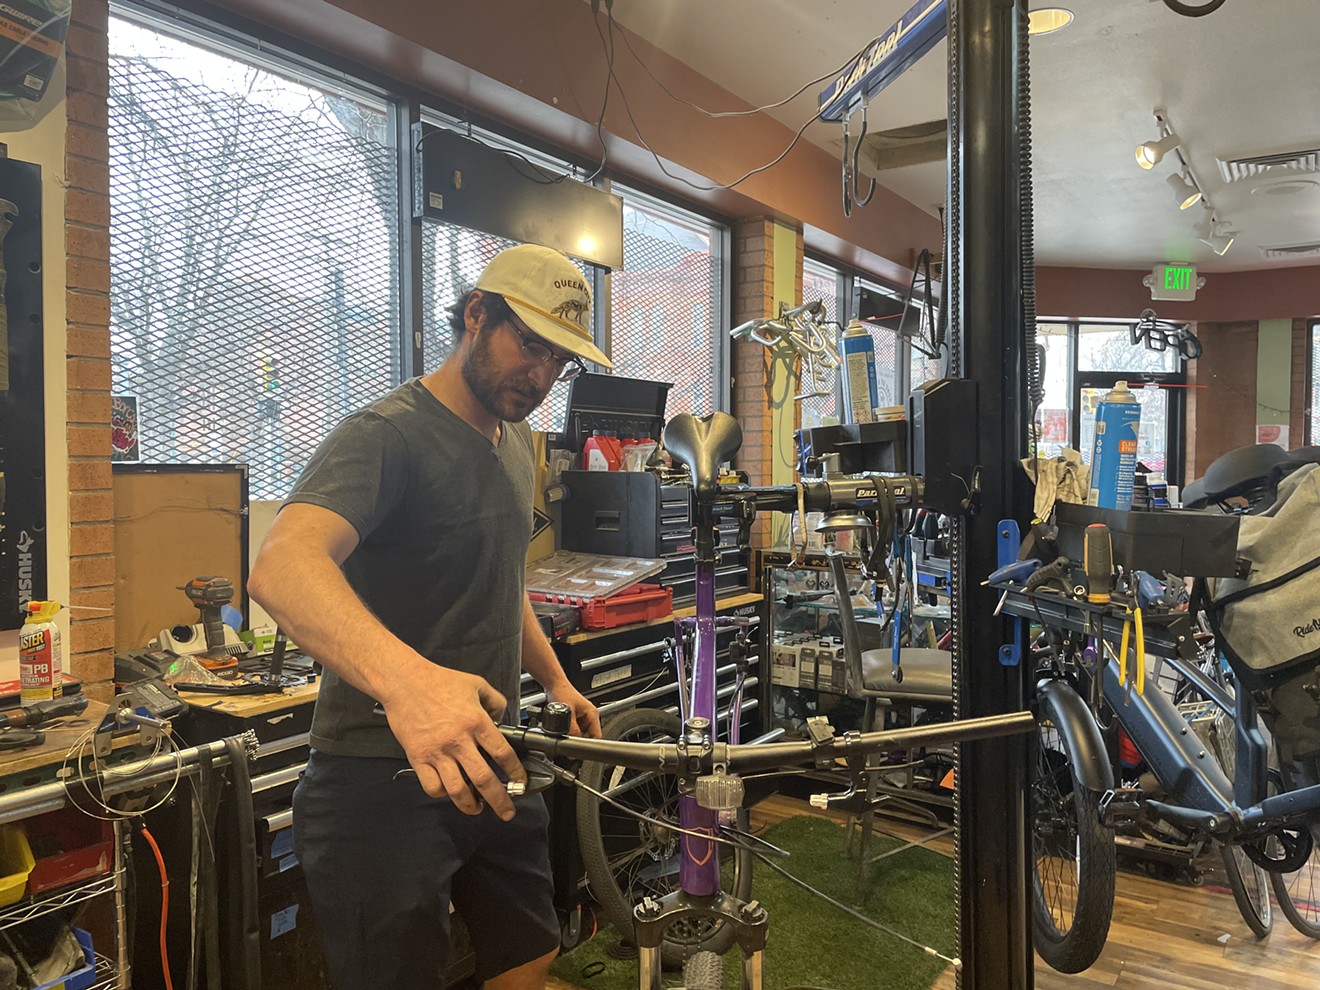 Dimitri Rumschlat has a passion for cycle repair.